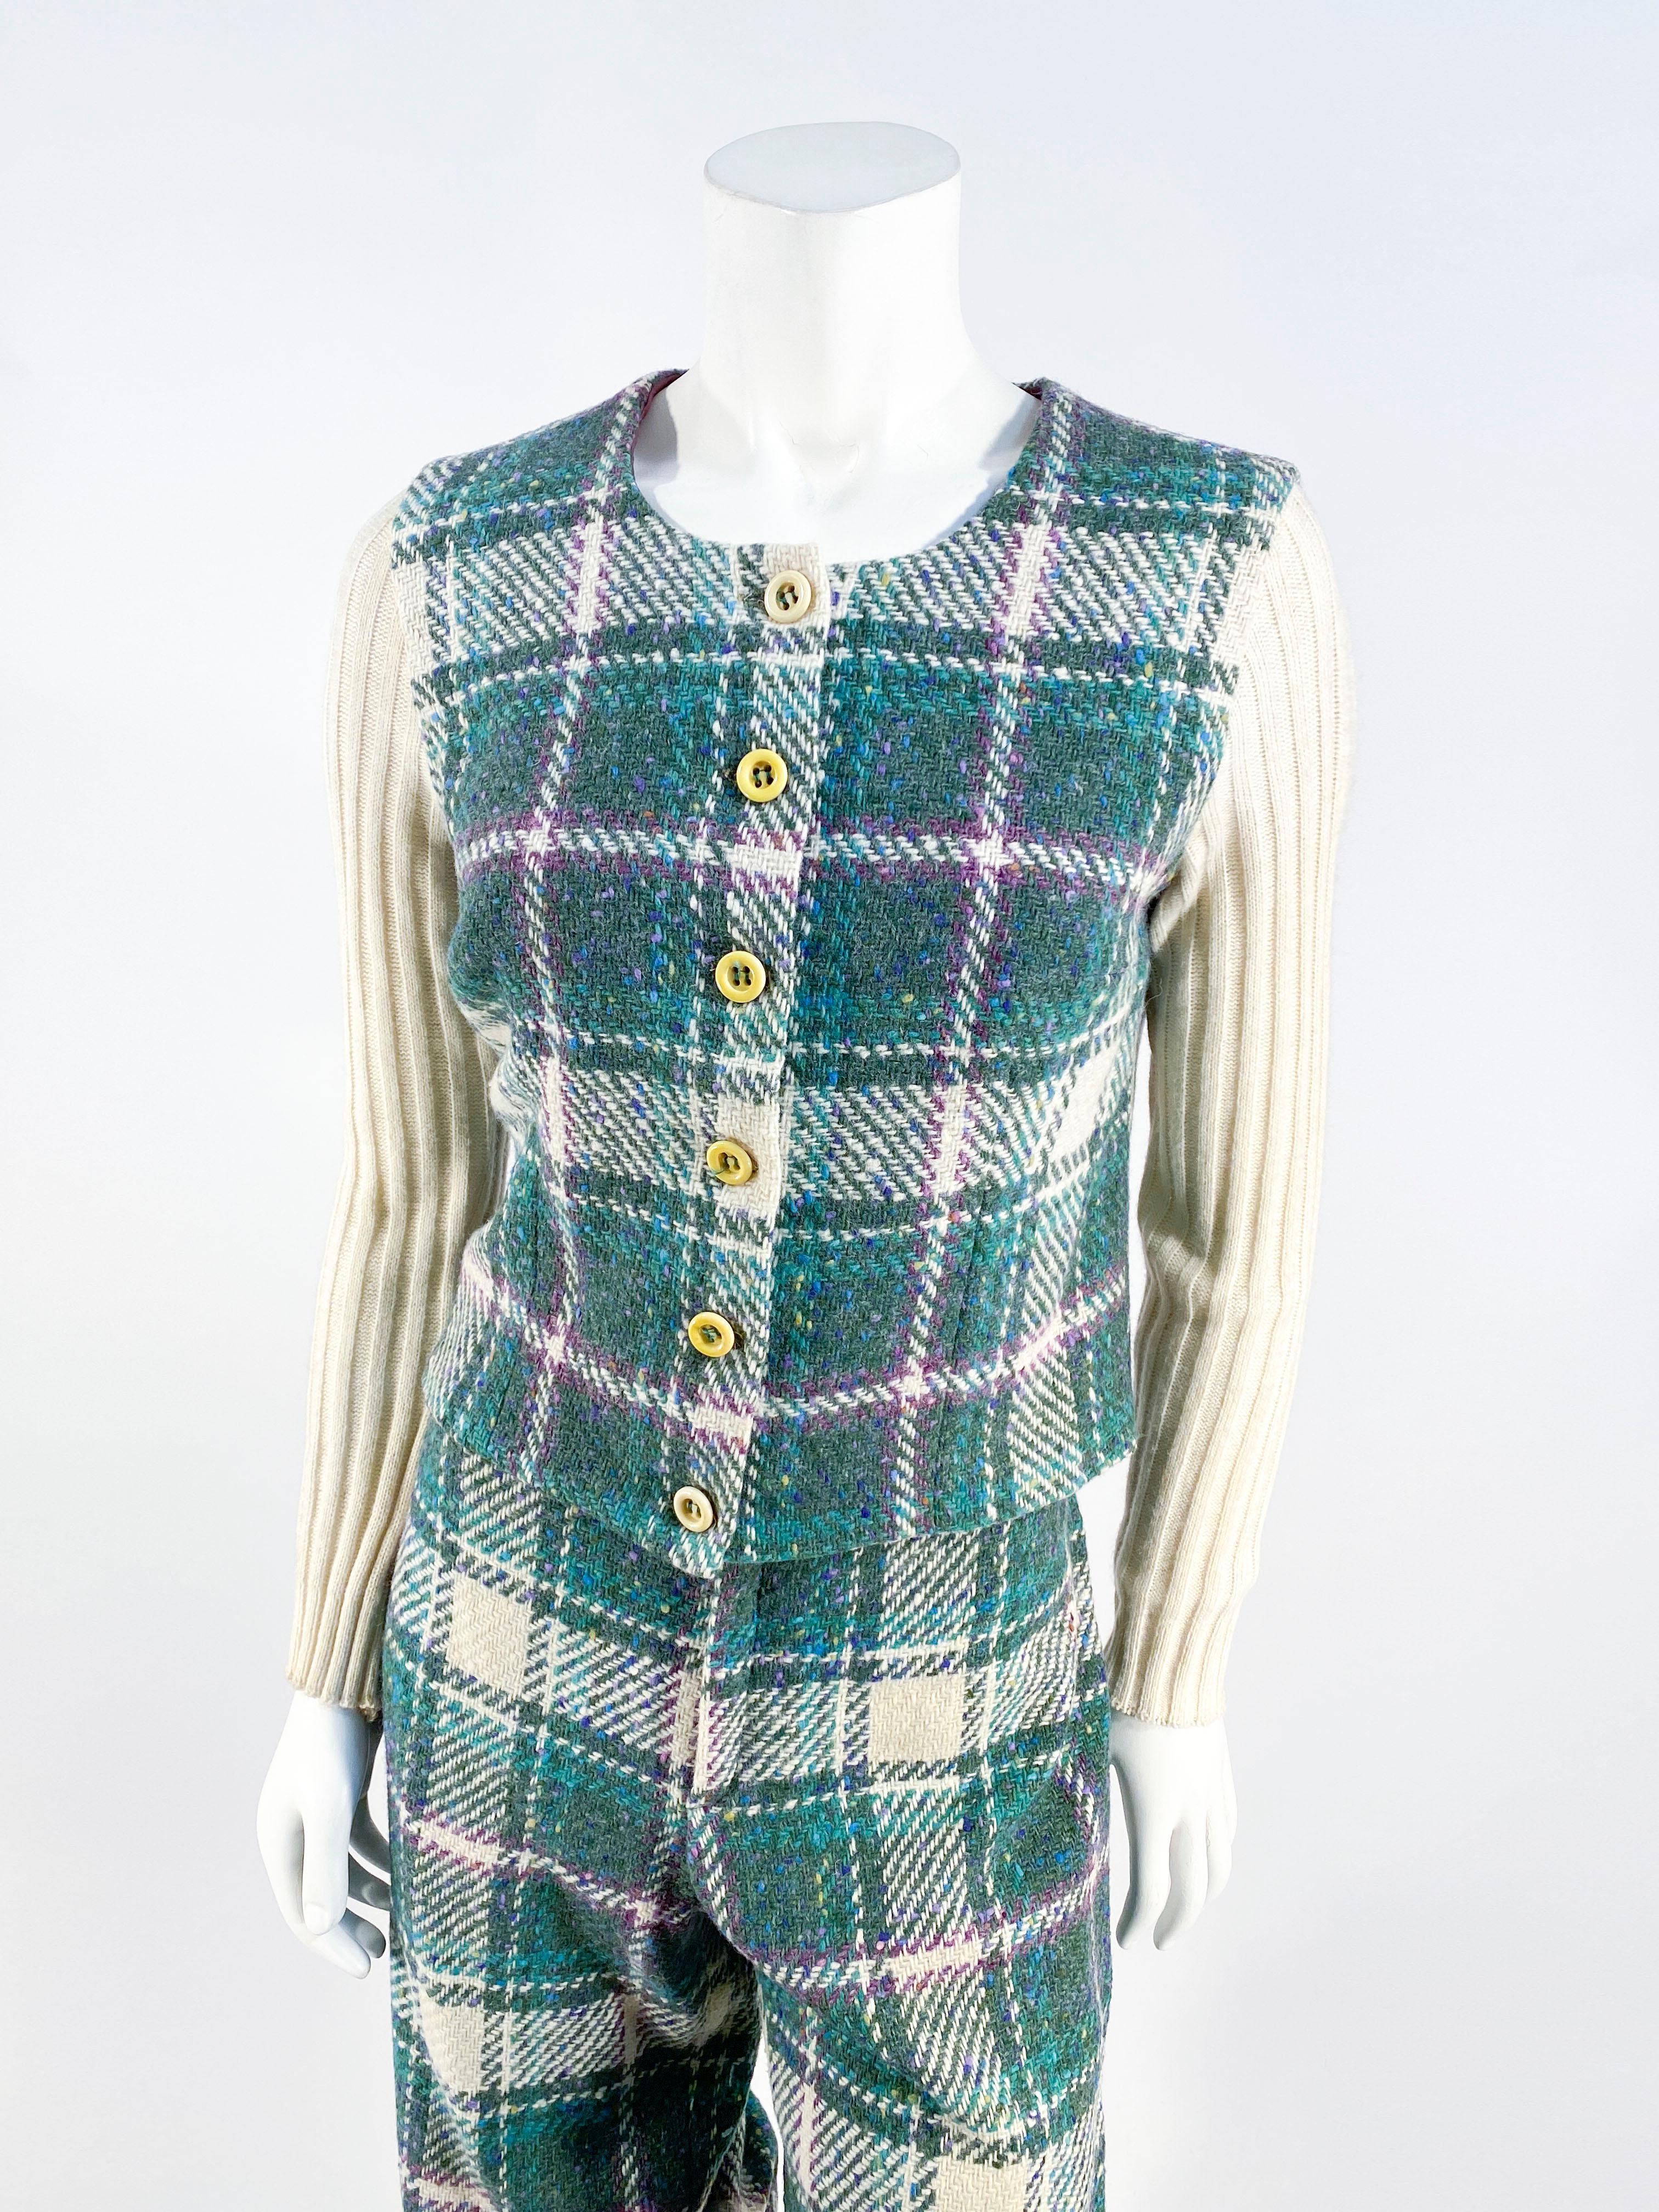 1970s wool sports set featuring a forest green plaid with stripes of purple and cream. The top has a front button down closure and cream ribbed knit full-length sleeves. The knickers have a hip hugger waist line, elastic at the knee, and is unlined.